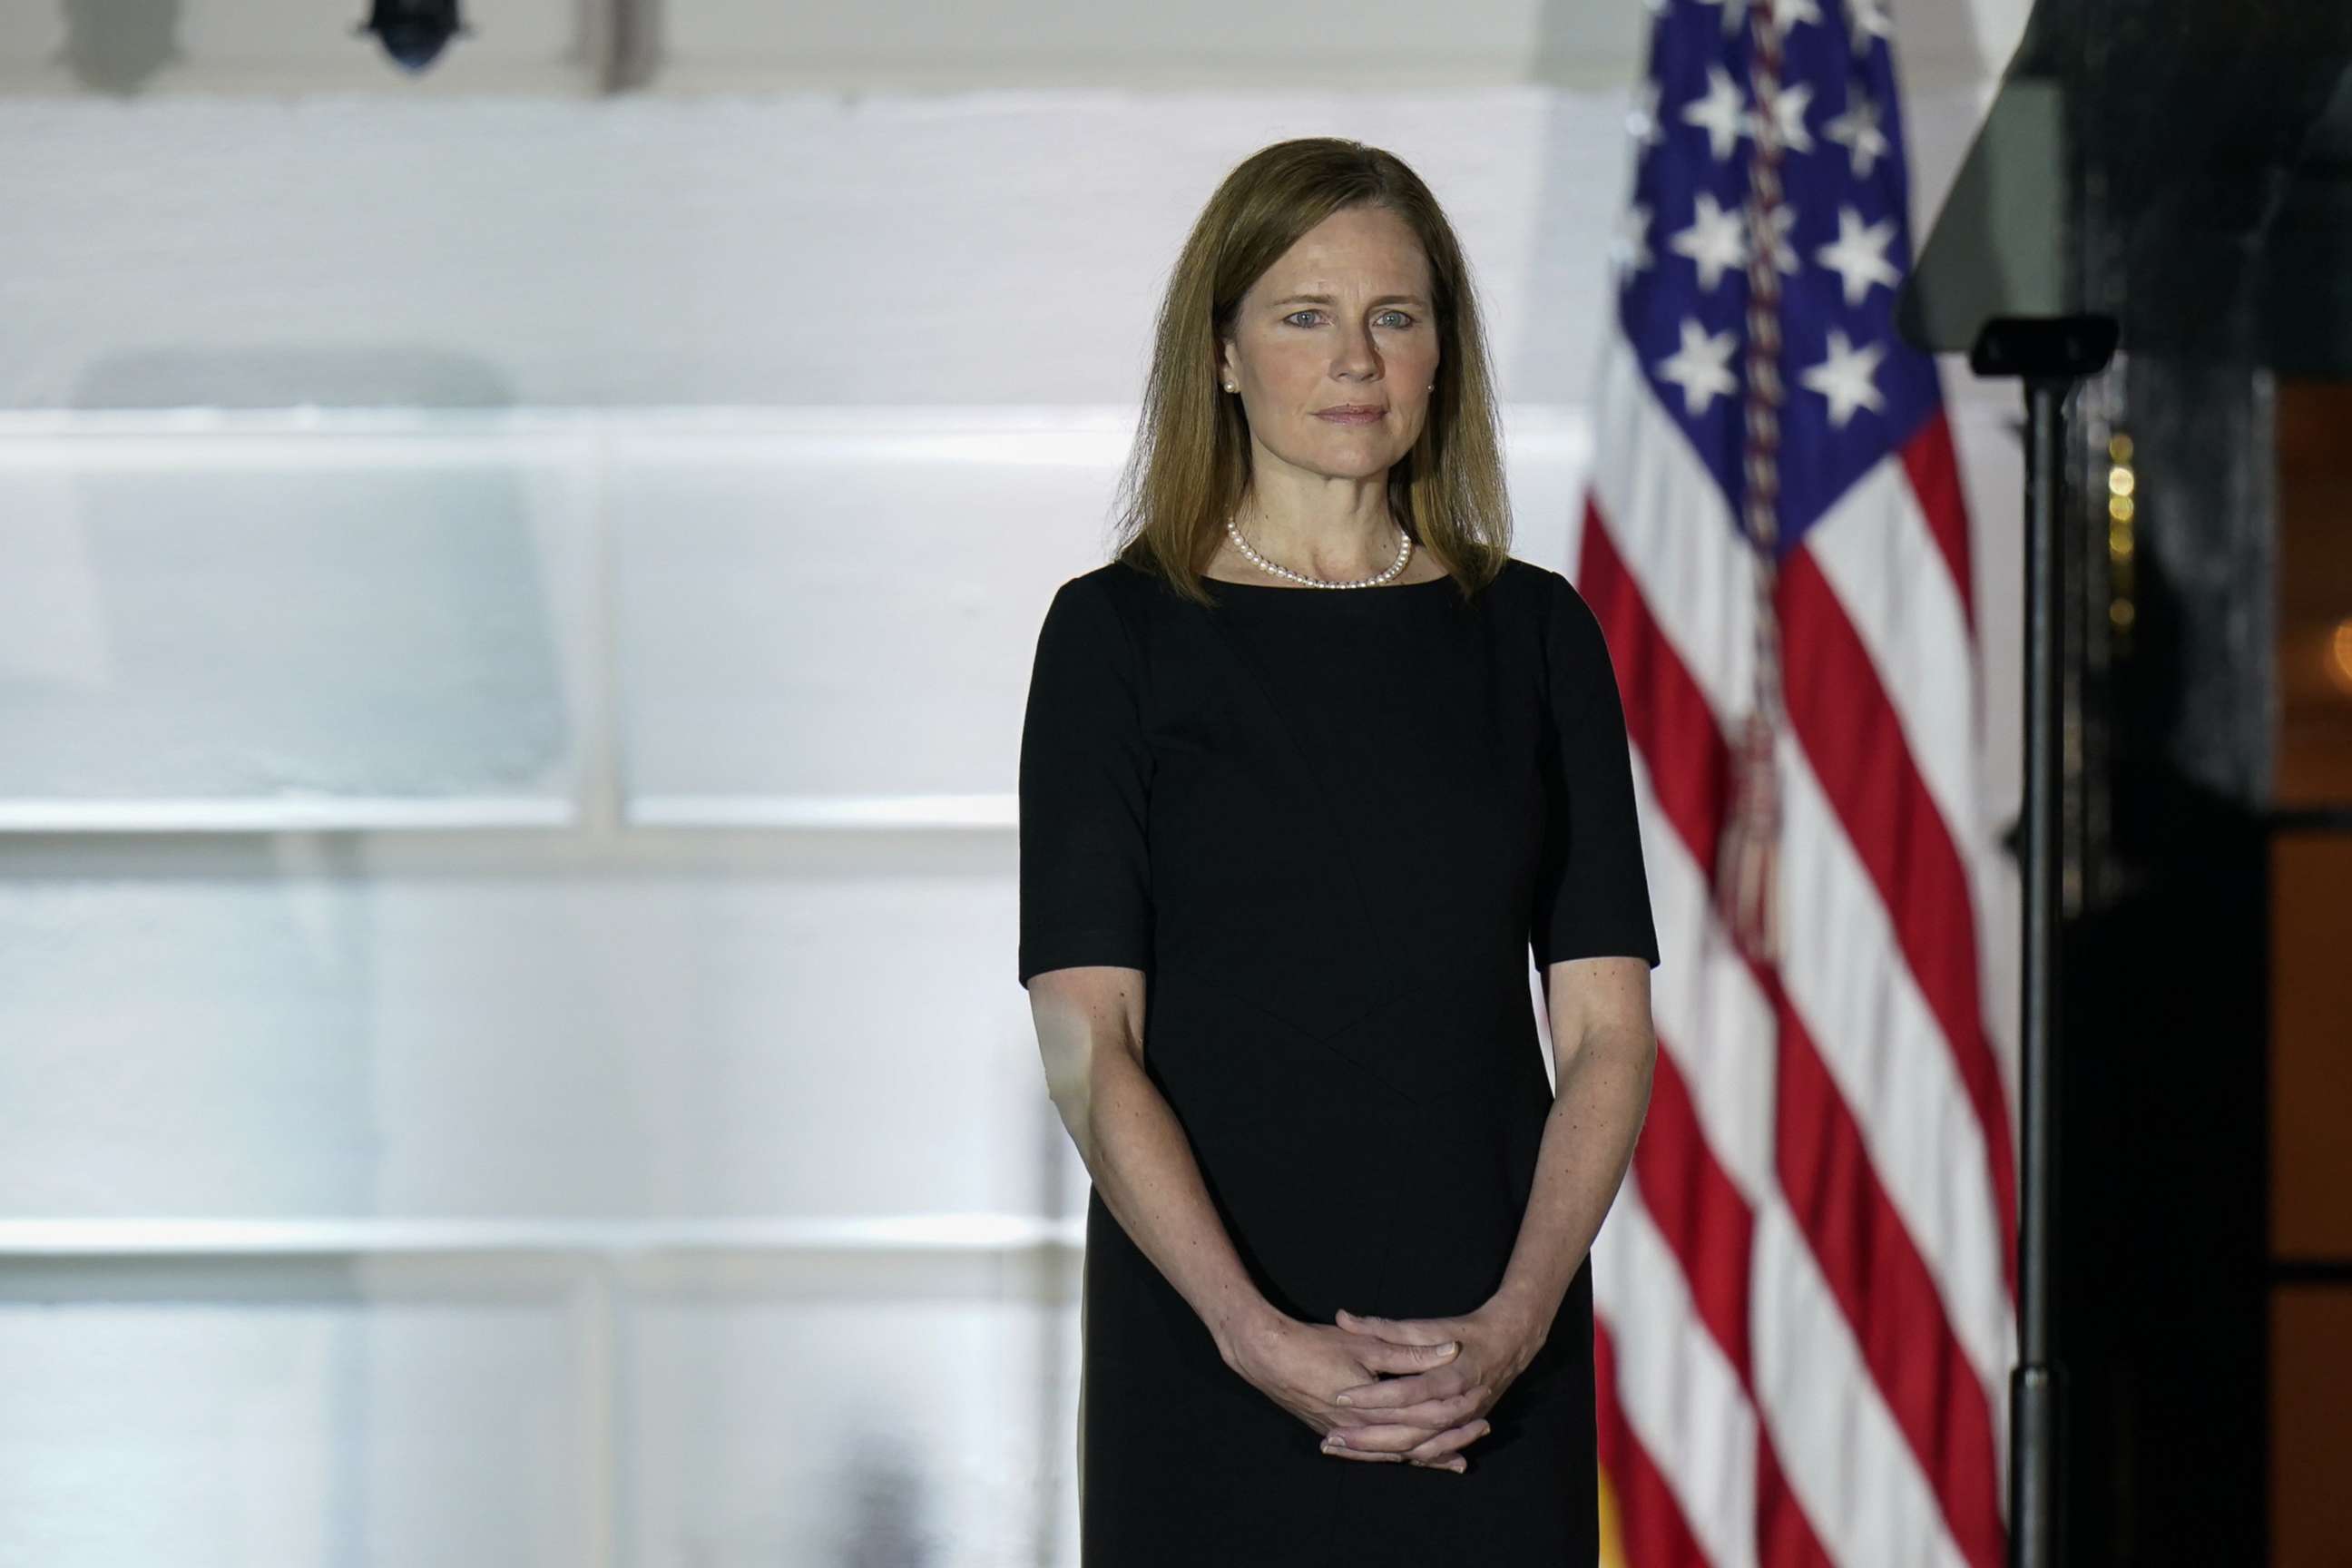 PHOTO: Amy Coney Barrett, associate justice of the U.S. Supreme Court, stands during a ceremony on the South Lawn of the White House in Washington, Oct. 26, 2020.